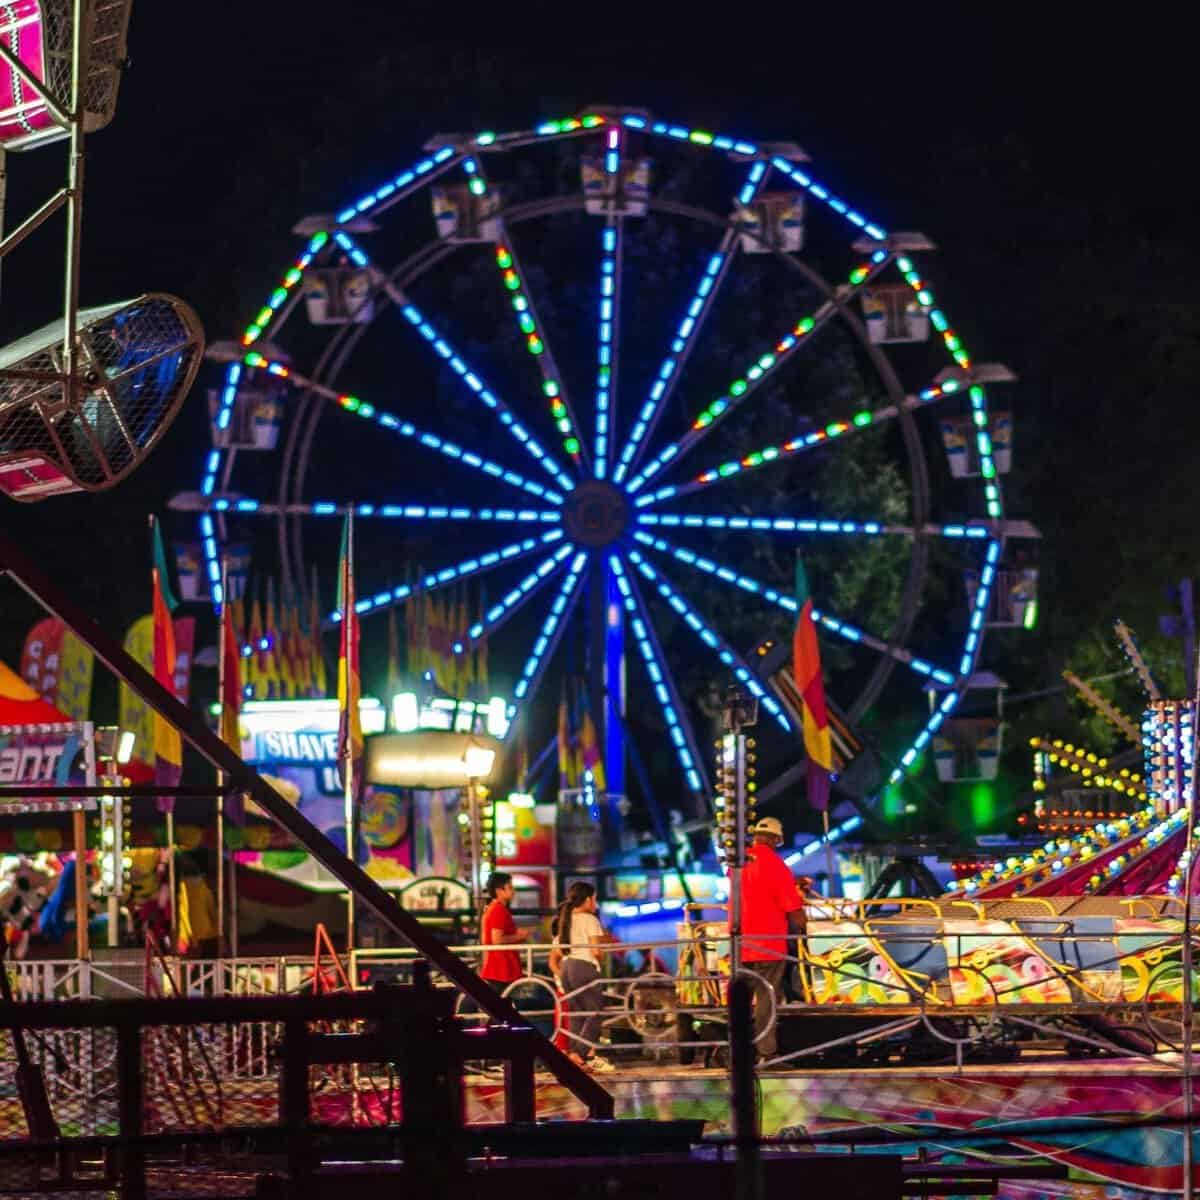 Chesterfield County Fair blends fun, community Enjoying RVA and all